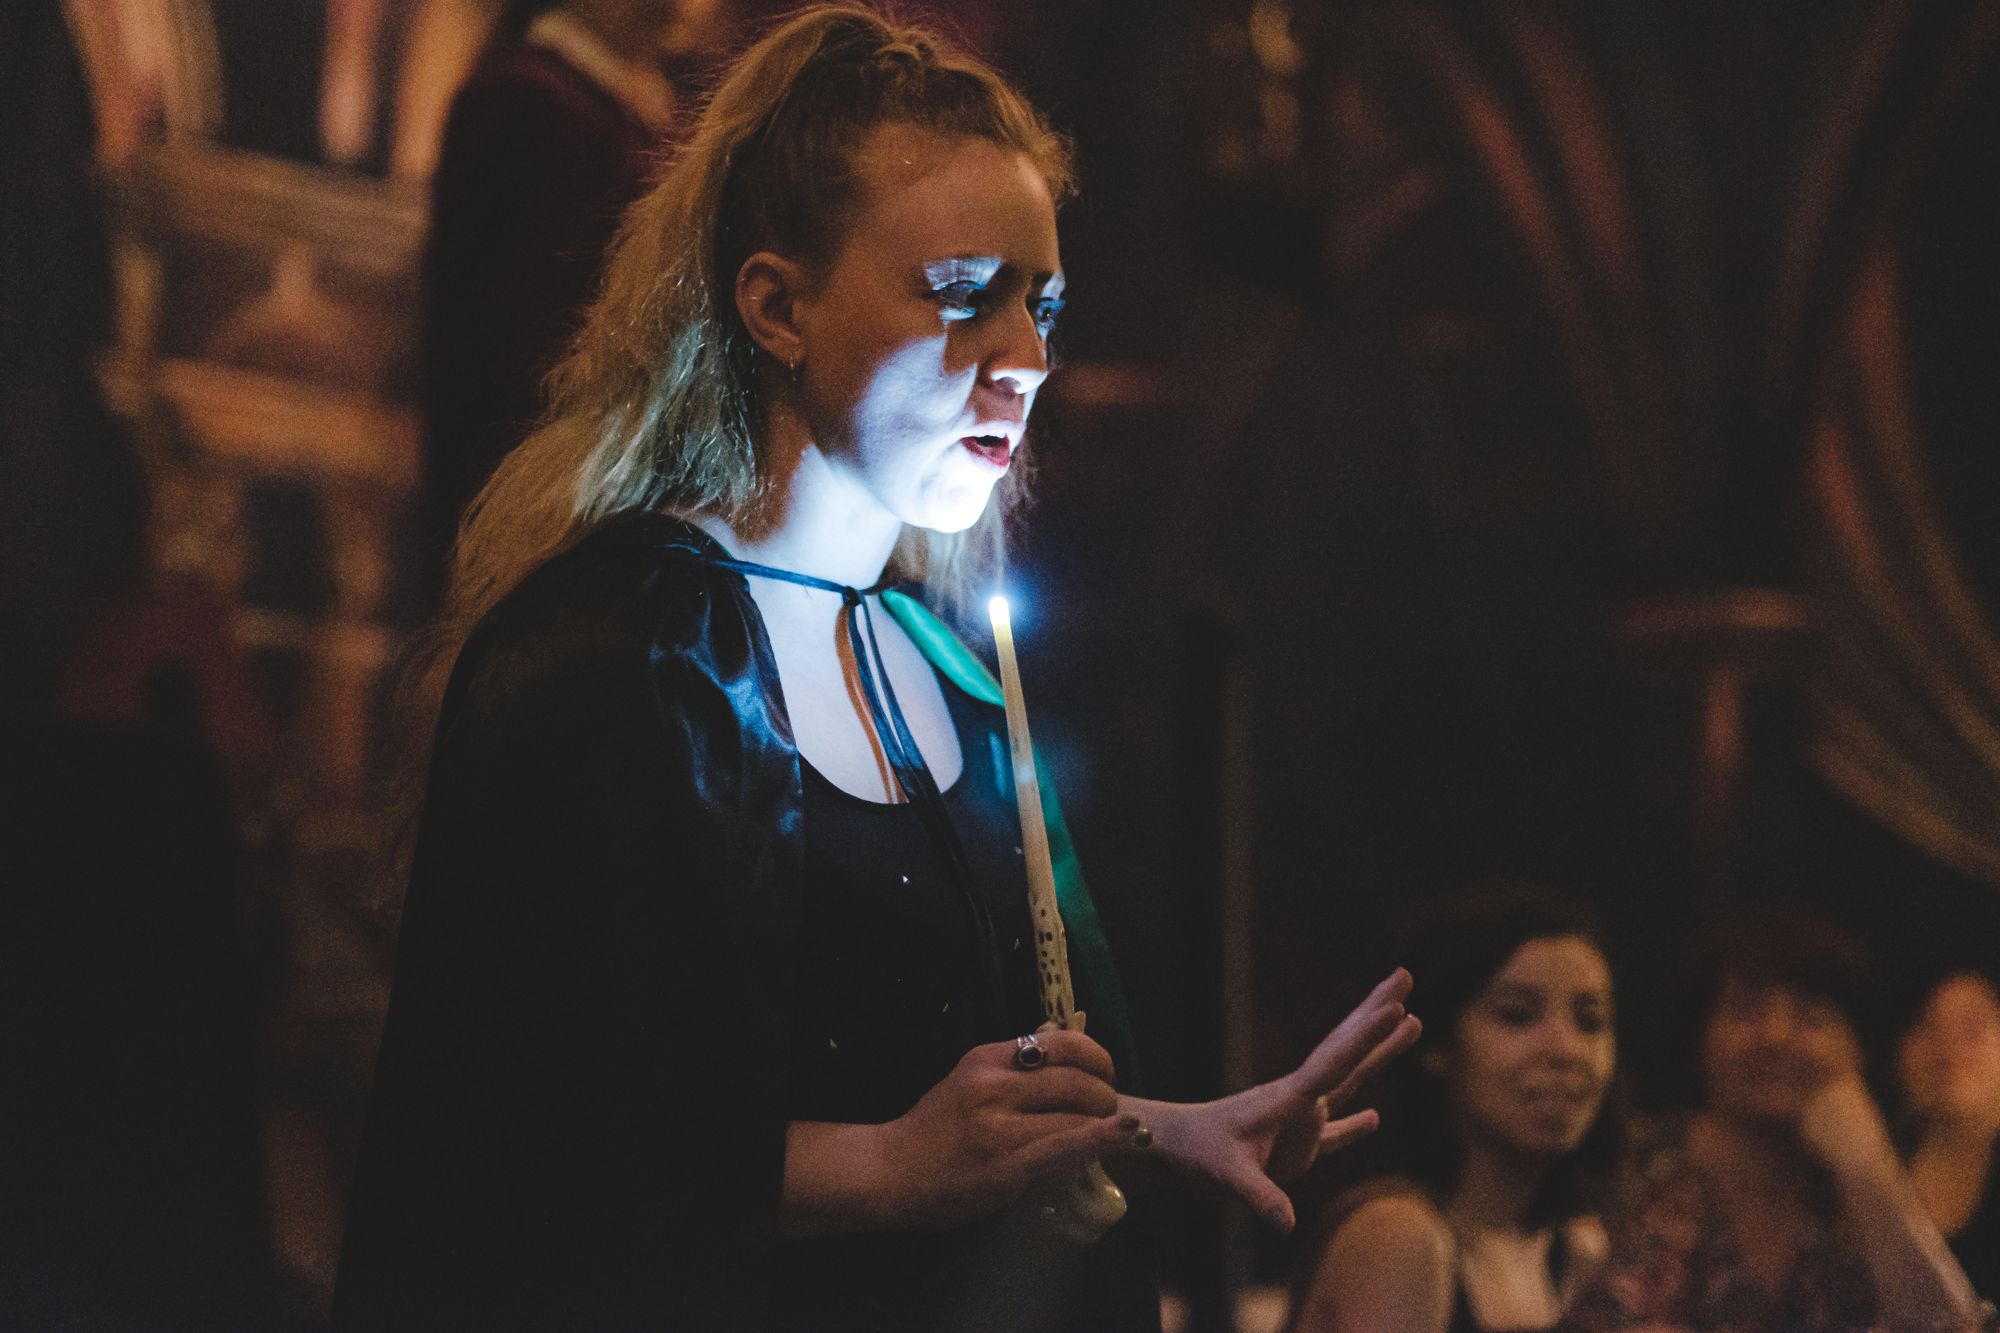 The Wizard's Den Vancouver – Light-Up Wands